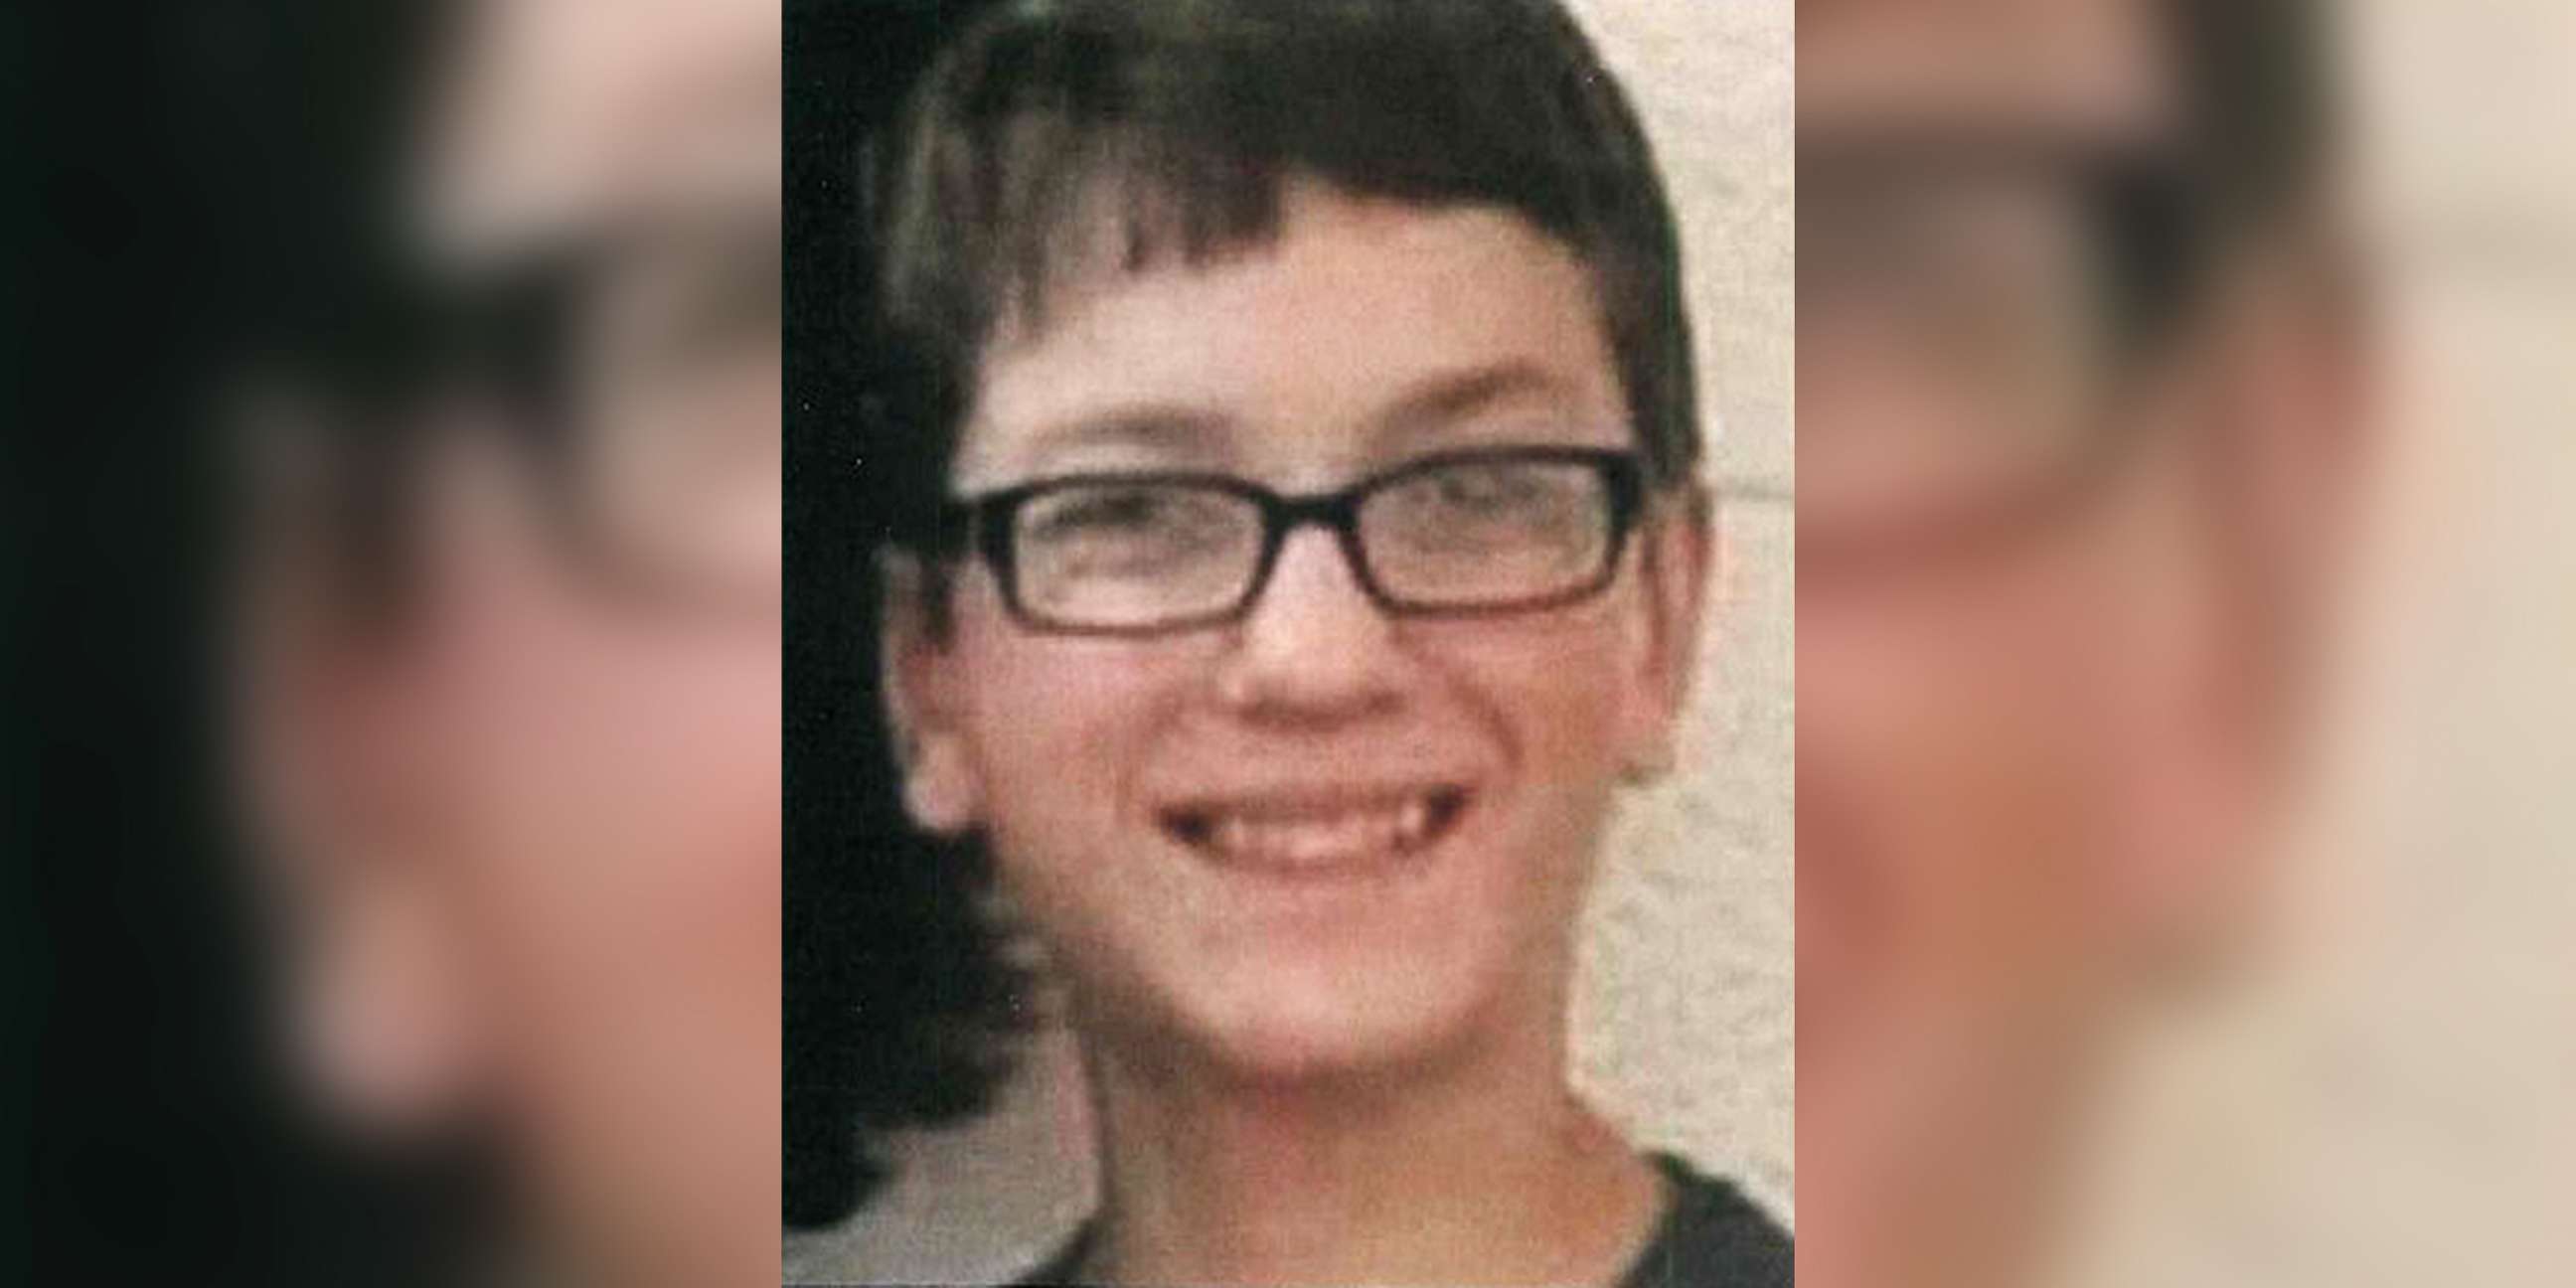 PHOTO: A poster posted by Port Clinton Police Department shows Harley Dilly, 14, who has been missing since Dec. 20, 2019, in Port Clinton, Ohio.